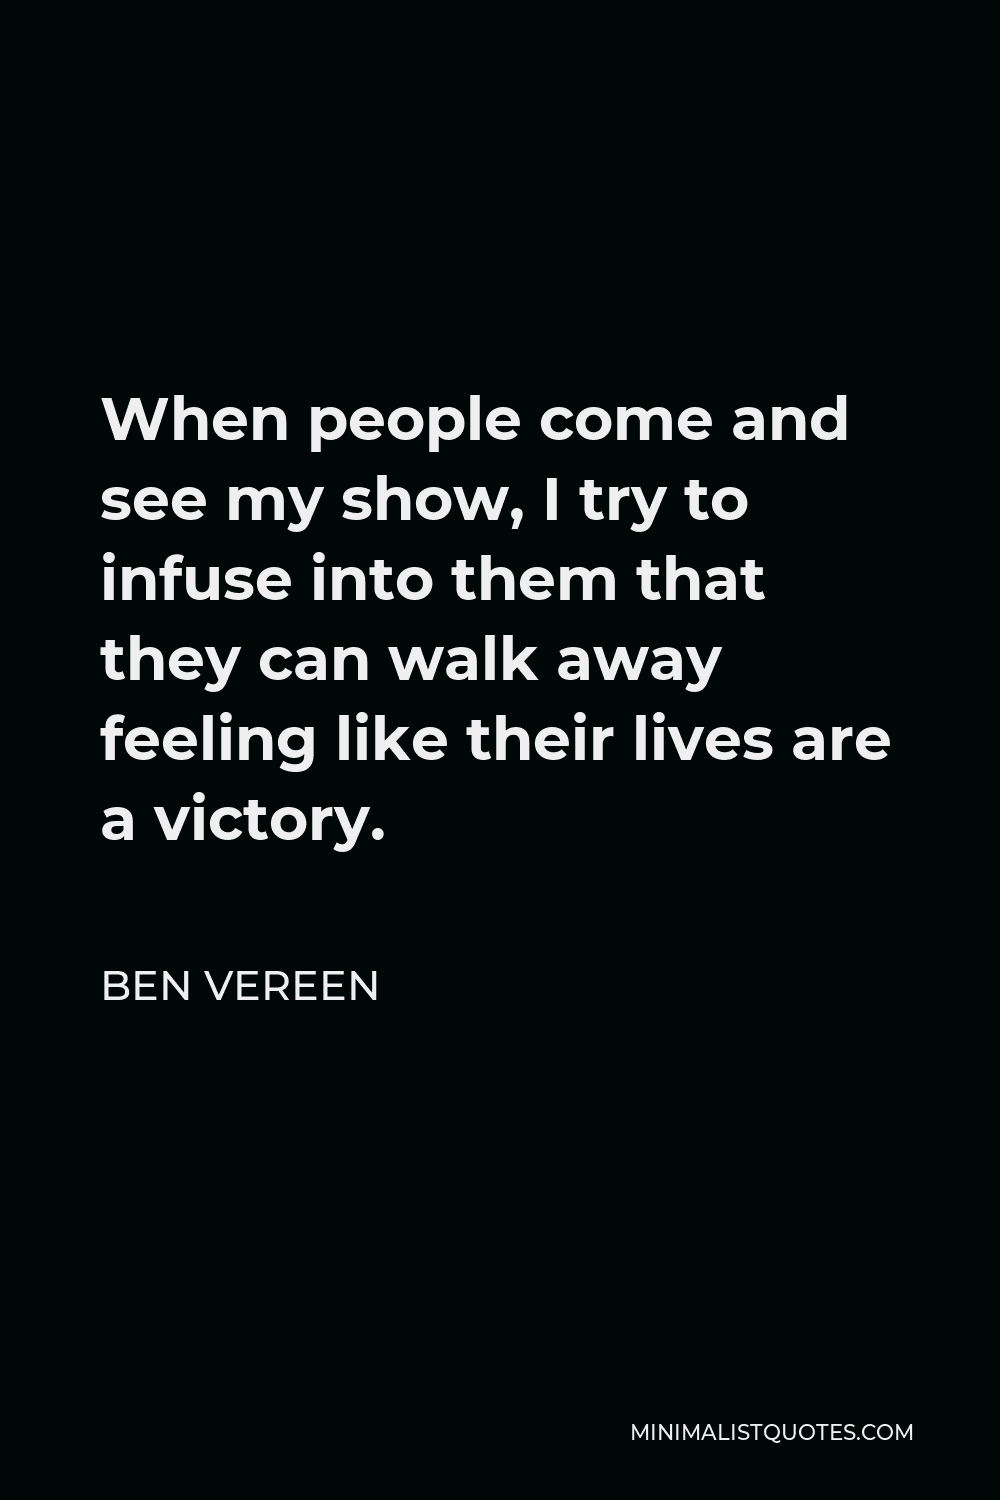 Ben Vereen Quote - When people come and see my show, I try to infuse into them that they can walk away feeling like their lives are a victory.